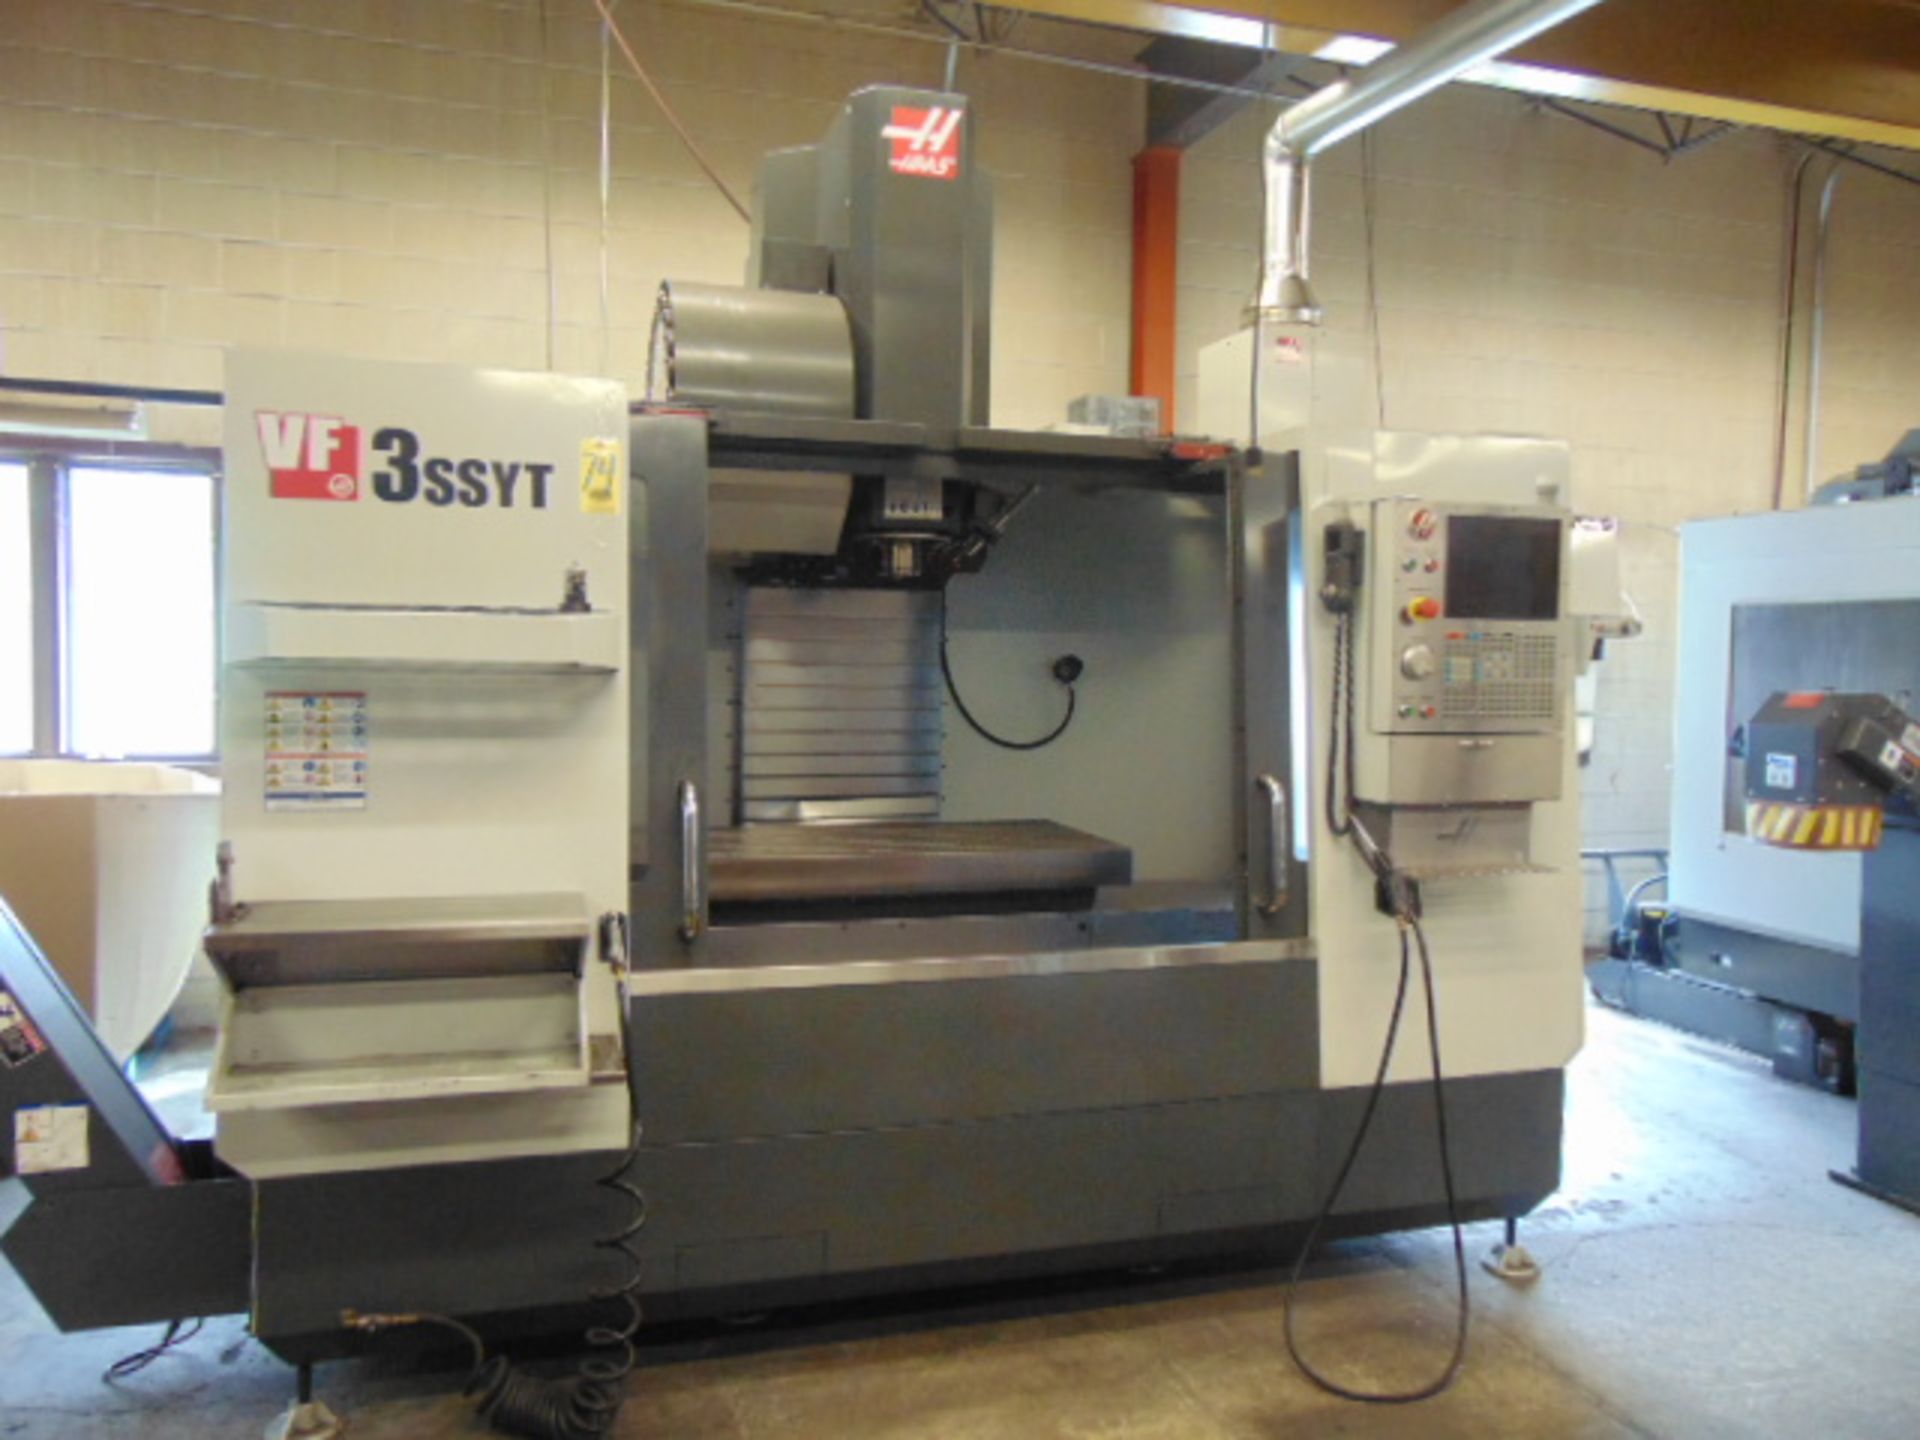 VERTICAL MACHINING CENTER, HAAS MDL. VF3SSYT, new 1/2016, 54” X 24” table, 1,750 lb. load, 40” X,